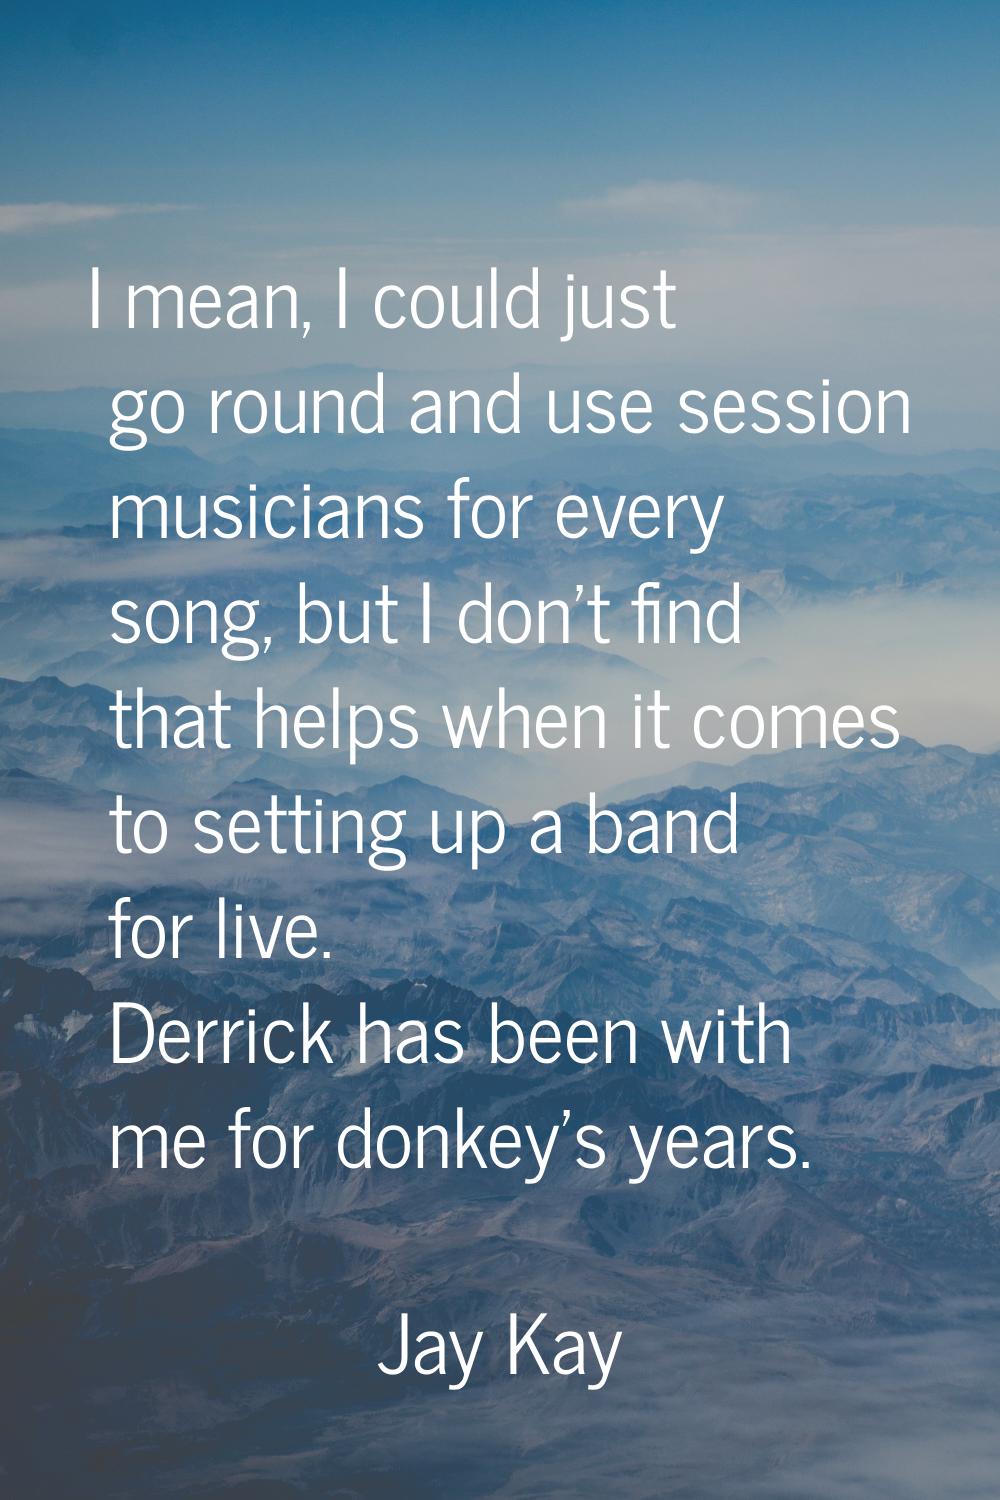 I mean, I could just go round and use session musicians for every song, but I don't find that helps